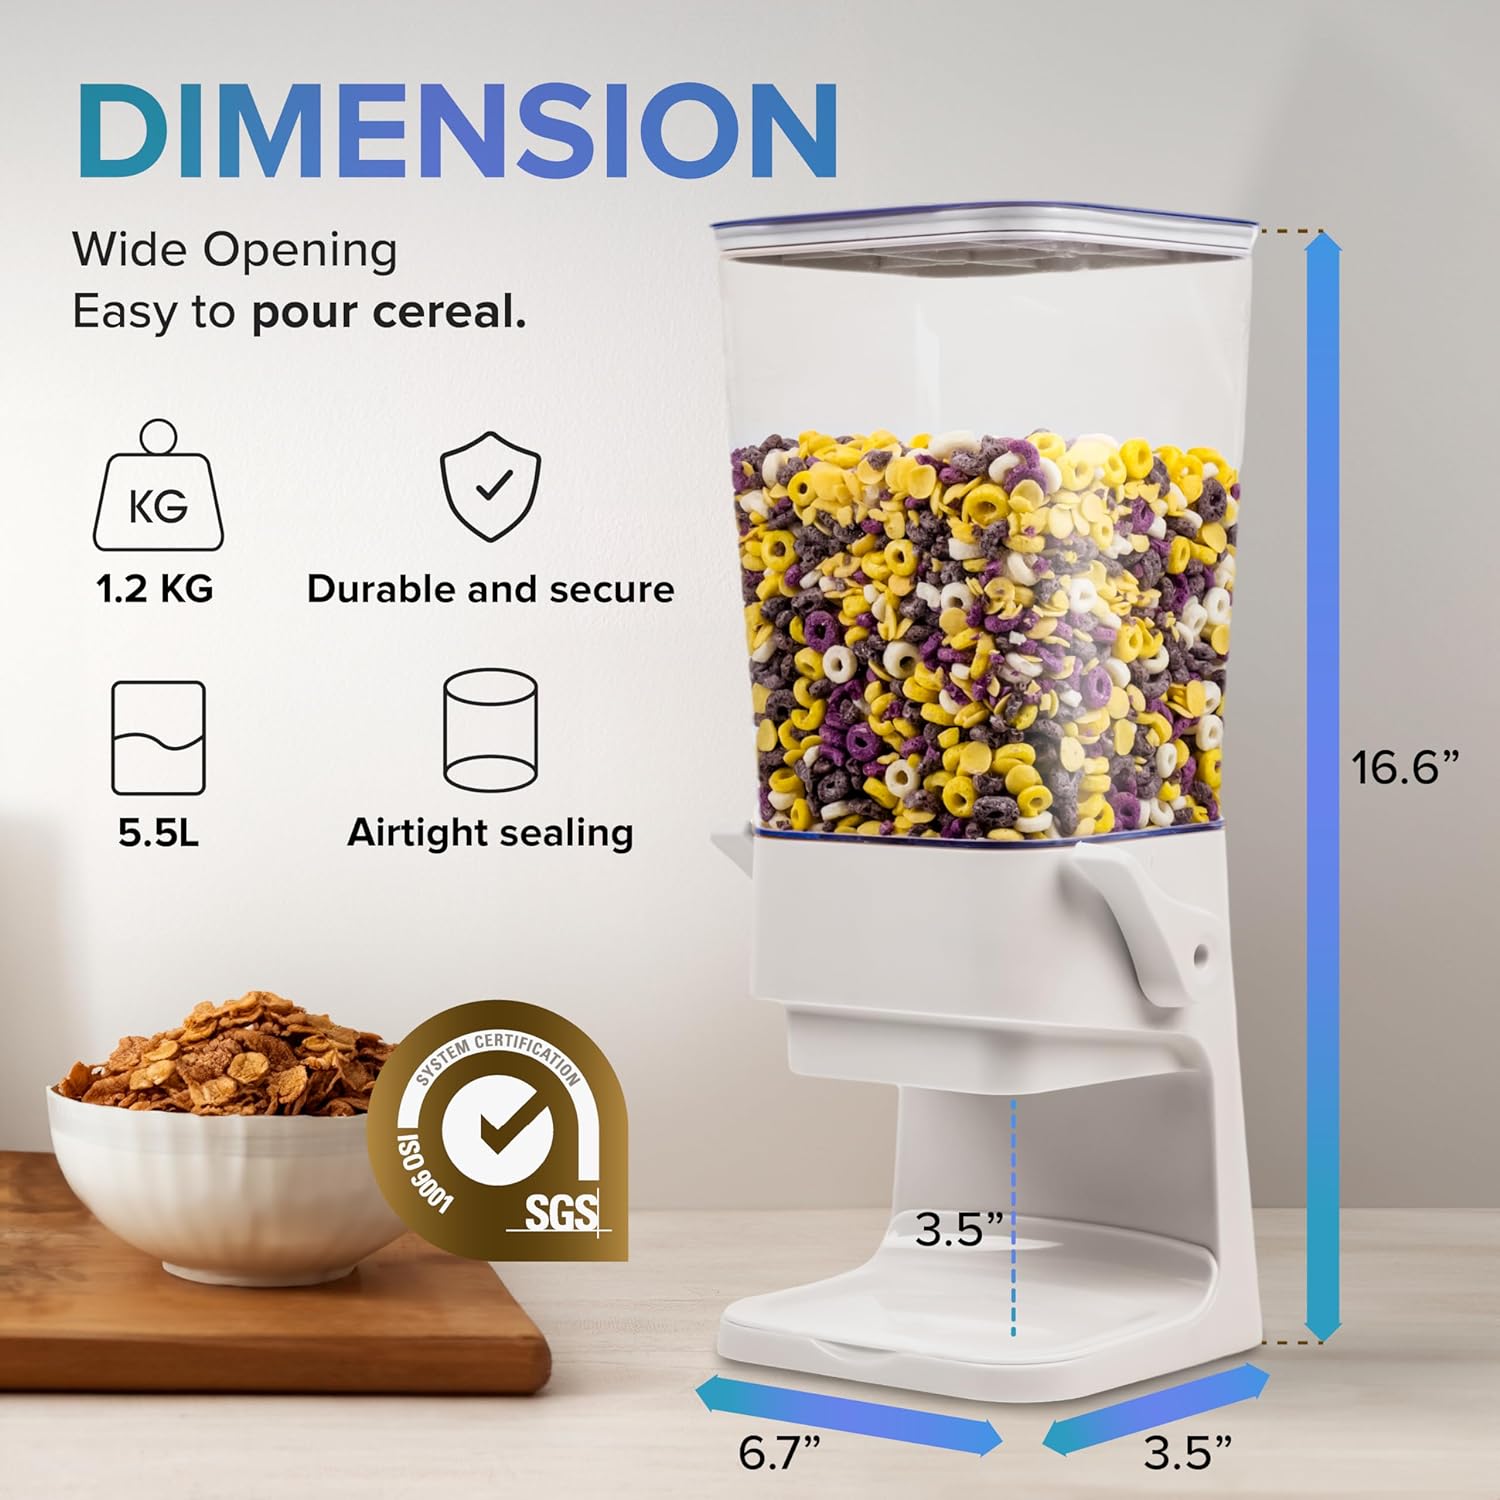 a cereal dispenser with measurements with text: 'DIMENSION Wide Opening Easy to pour cereal. KG V 1.2 KG Durable and secure 16.6" 5.5L Airtight sealing SYSTEM CERTIFICATION SGS L006 OSI 3.5" 6.7" 3.5"'